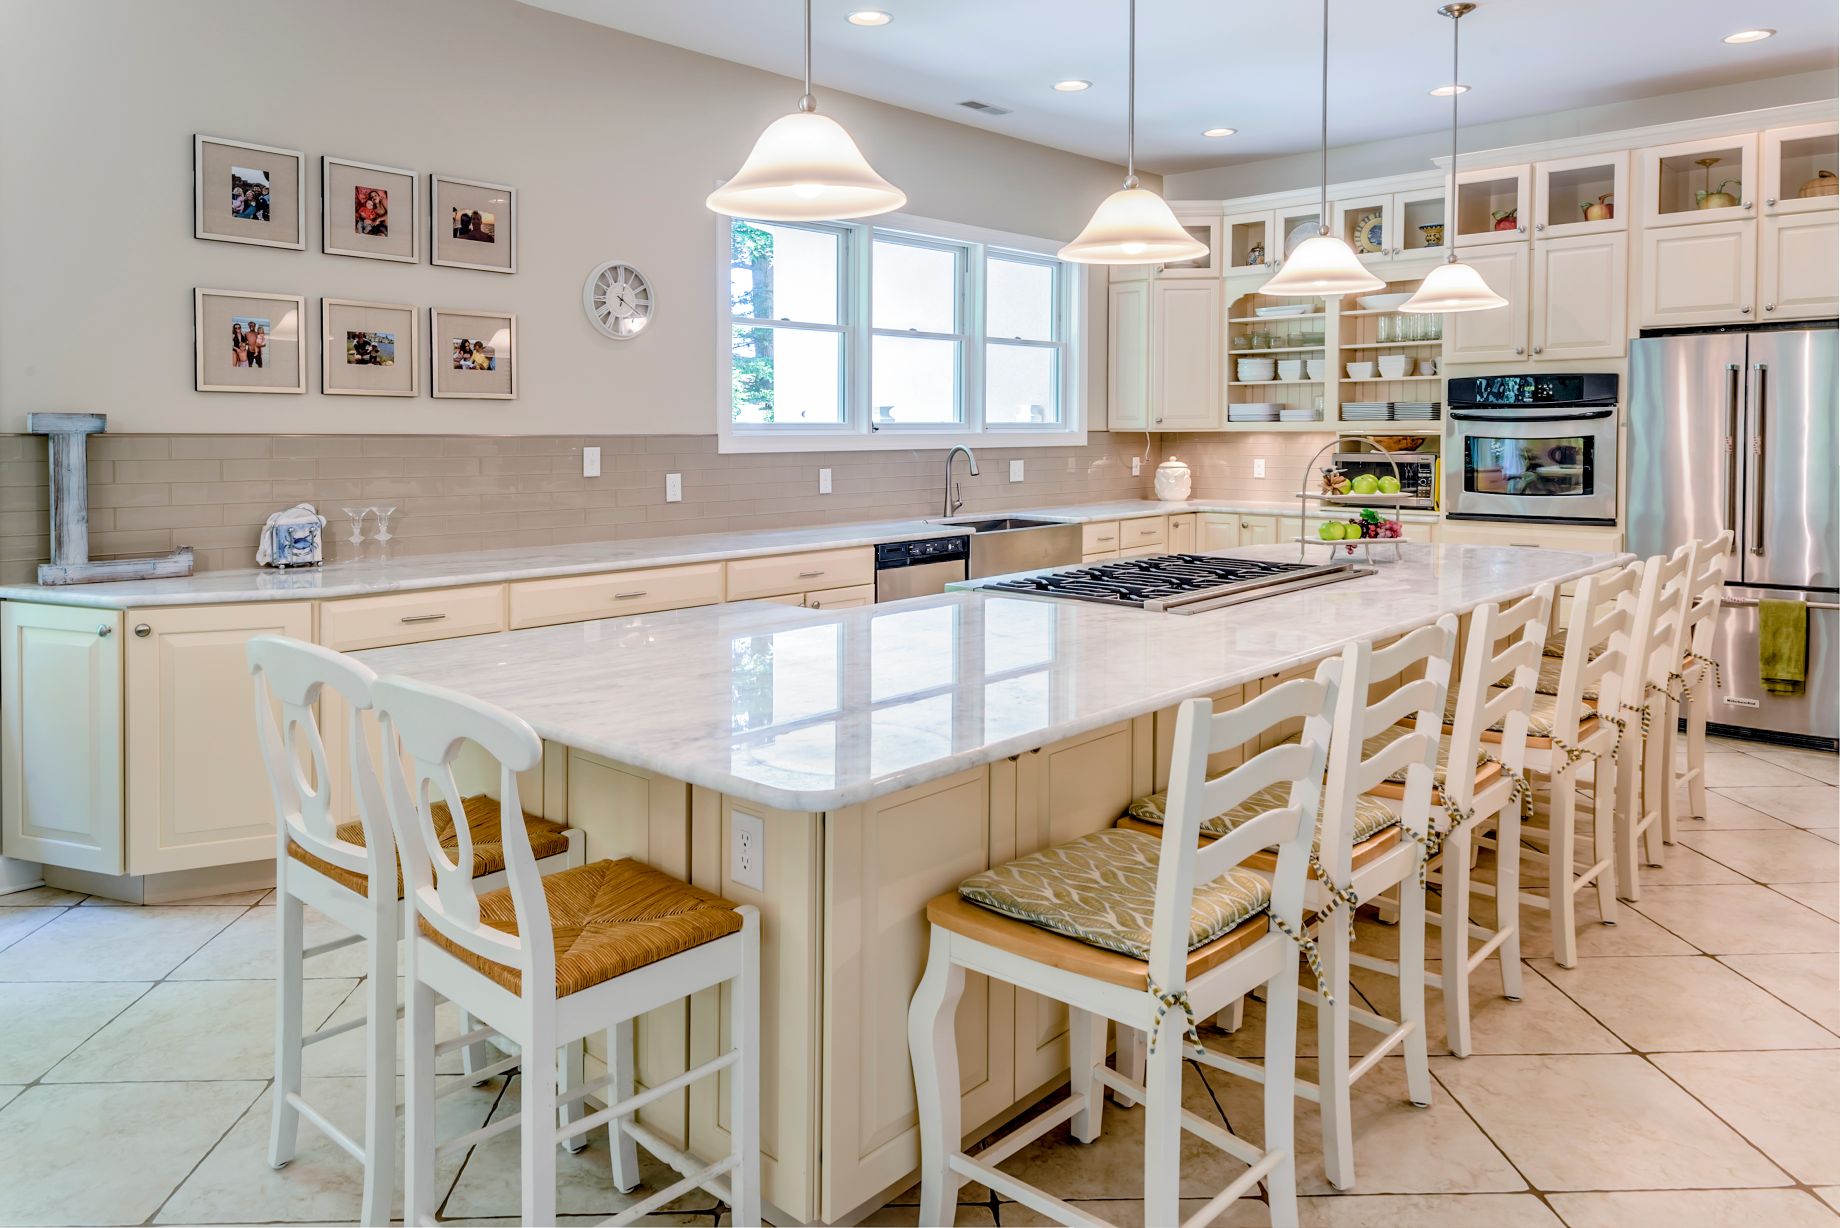 Kitchen in Juniper Court, Ocean Pines MD with Island with White Marble Countertop and White Tiles Flooring